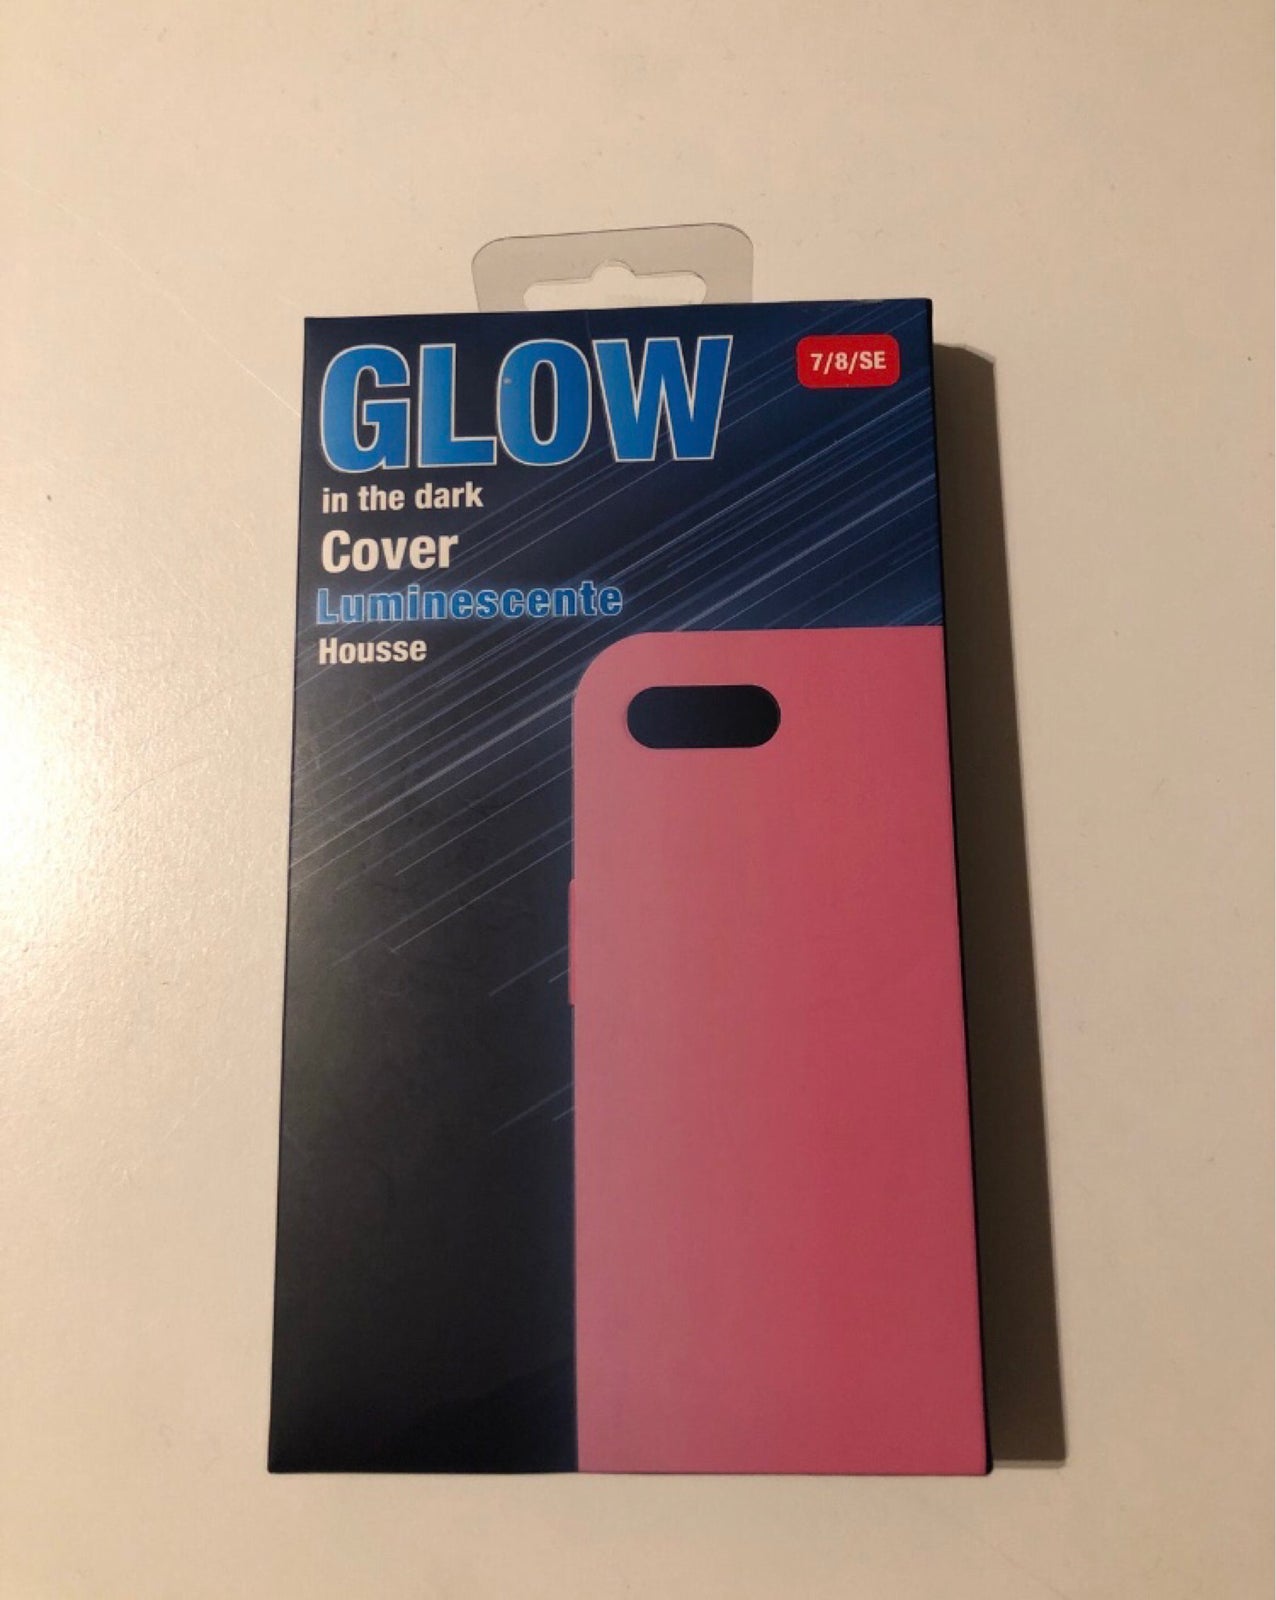 Cover, t. iPhone, 7/8/SE